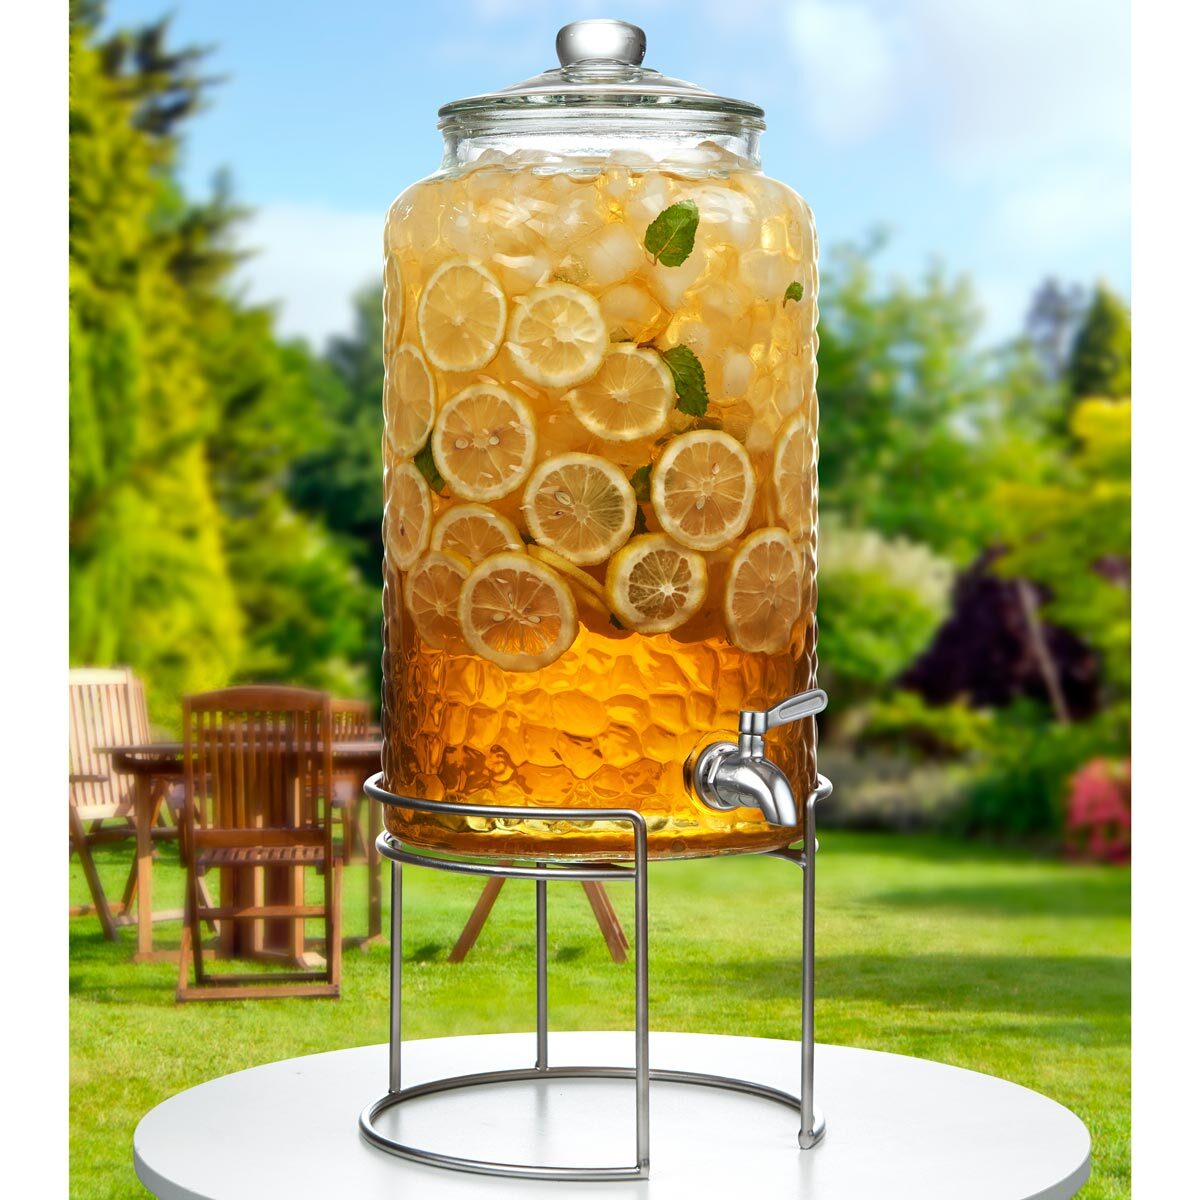 King Crystal 12 Litres Glass Drink Dispenser with Stand